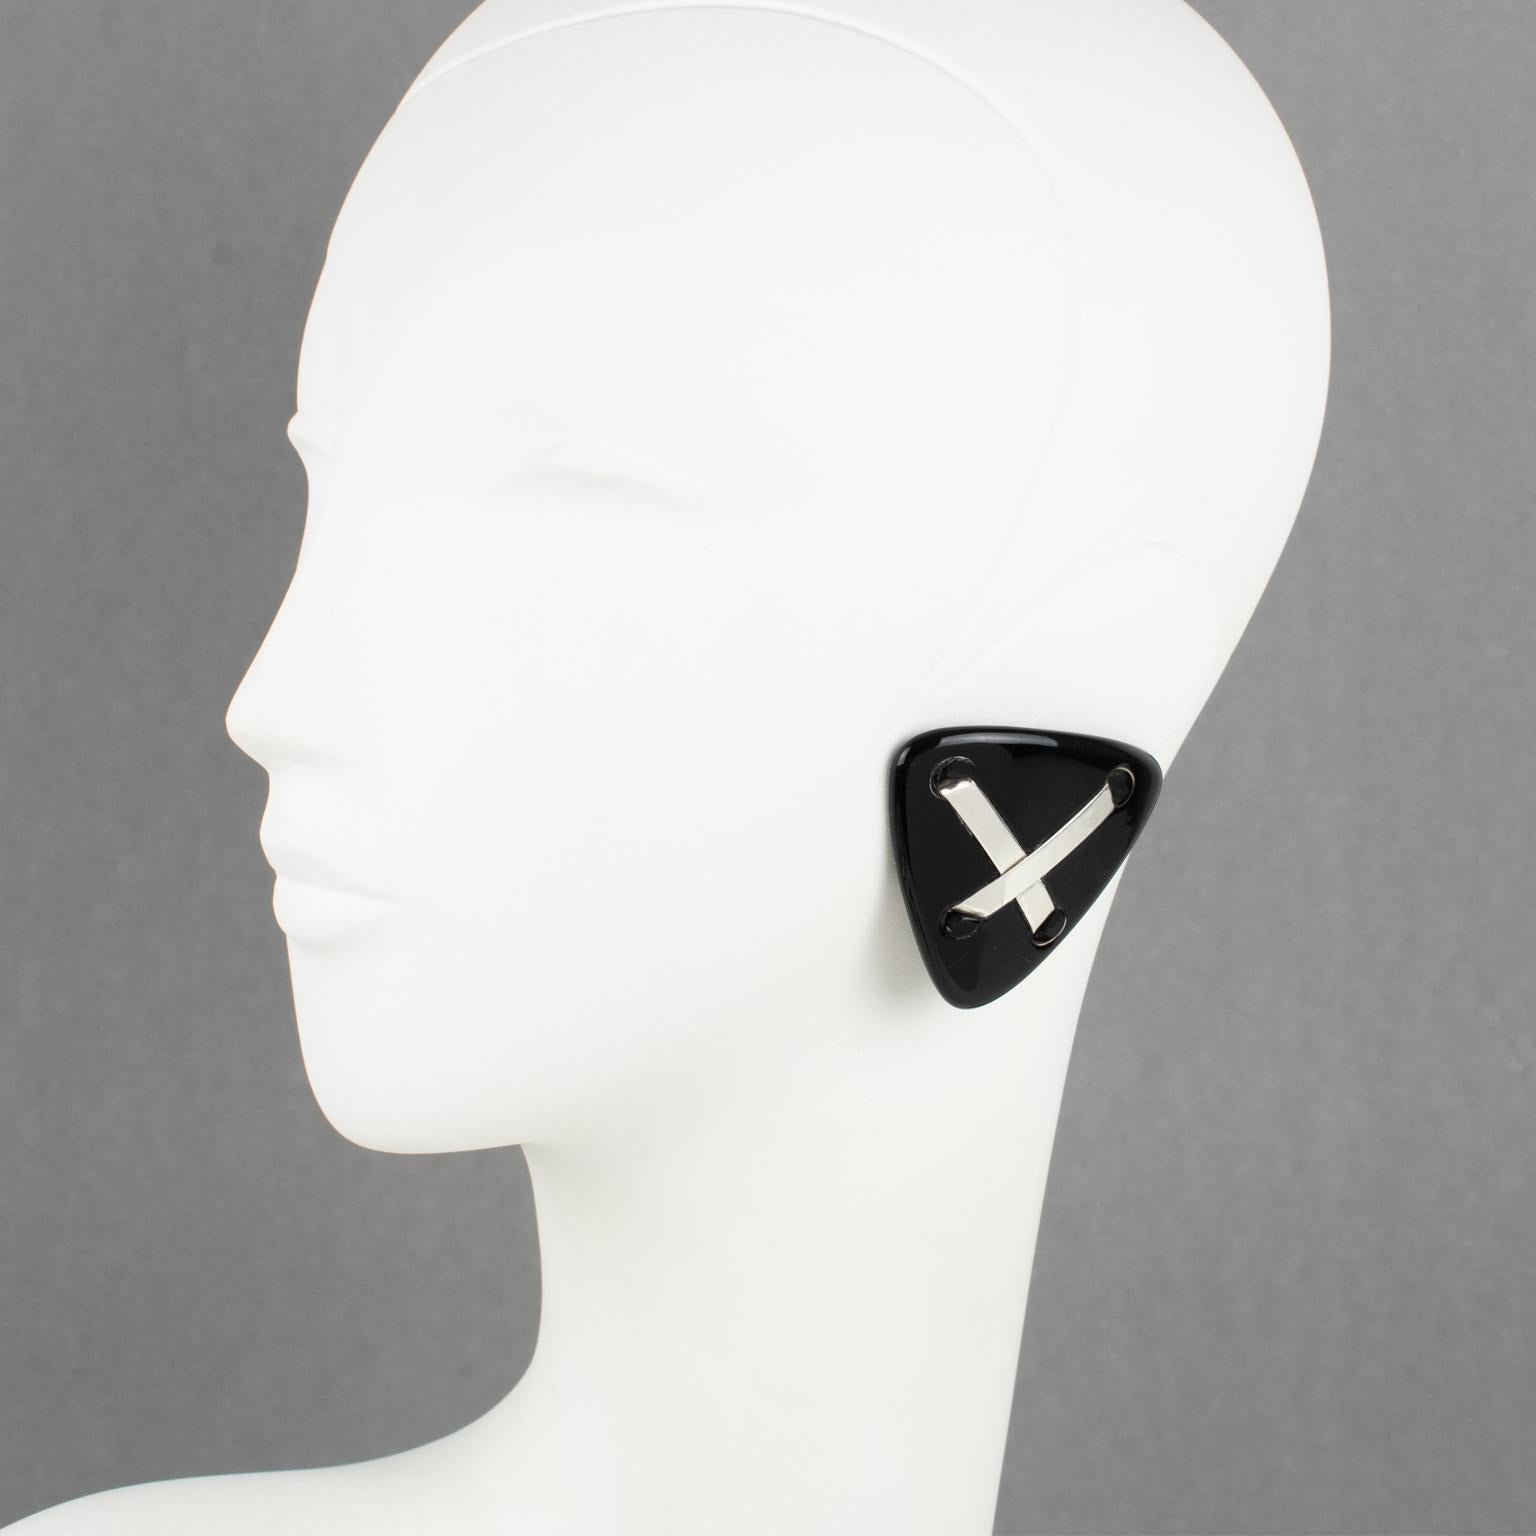 Anne and Frank Vigneri designed these lovely Lucite clip-on earrings in the 1980s. The geometric triangle design features a black Lucite element, topped with sterling silver crossed bands. The earrings are unsigned, but the special French clip-back